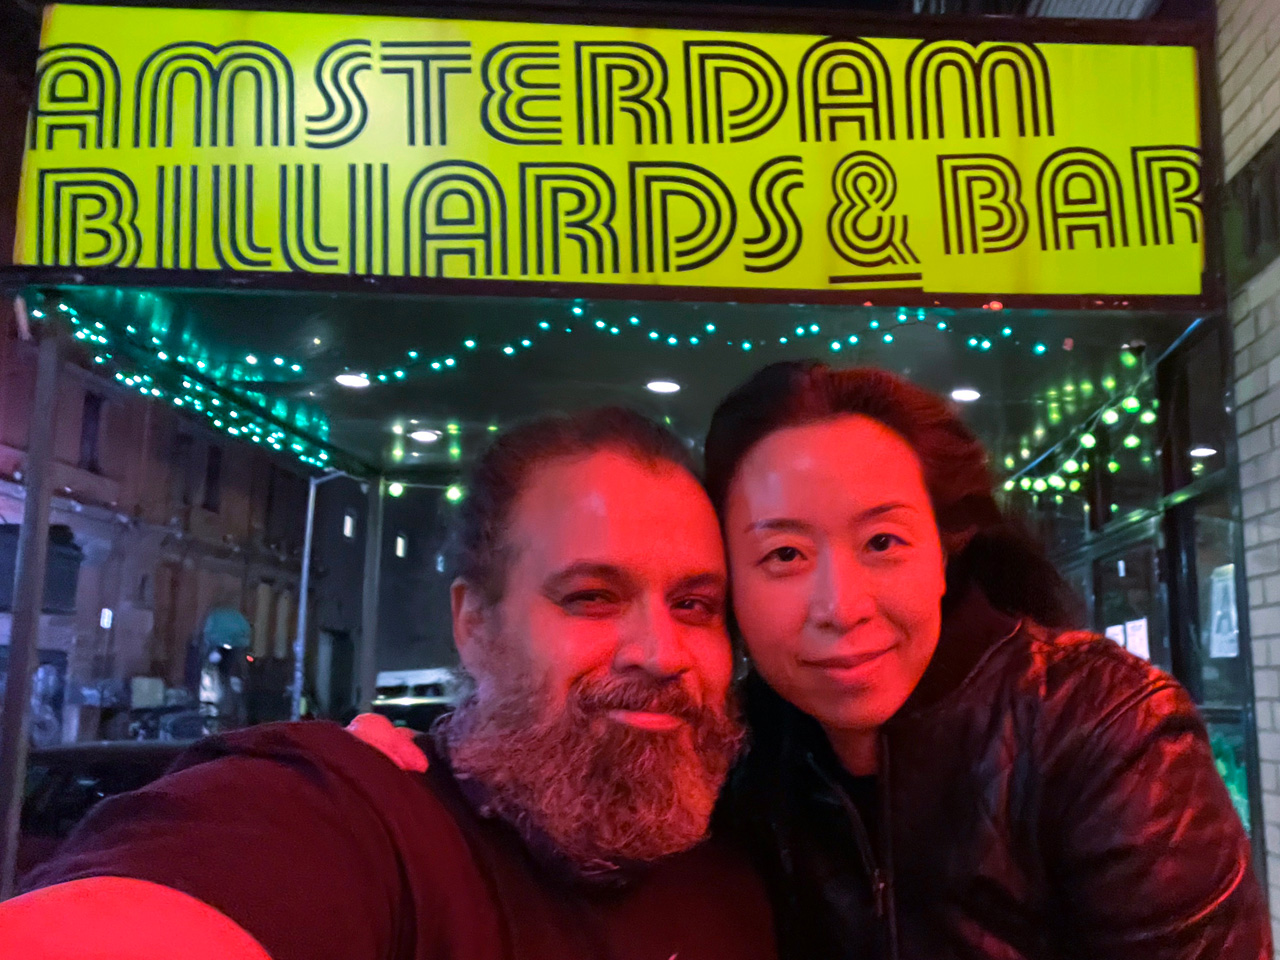 The Two of us taking a candid picture in front of Amsterdam Billiards & Bar located in NYC